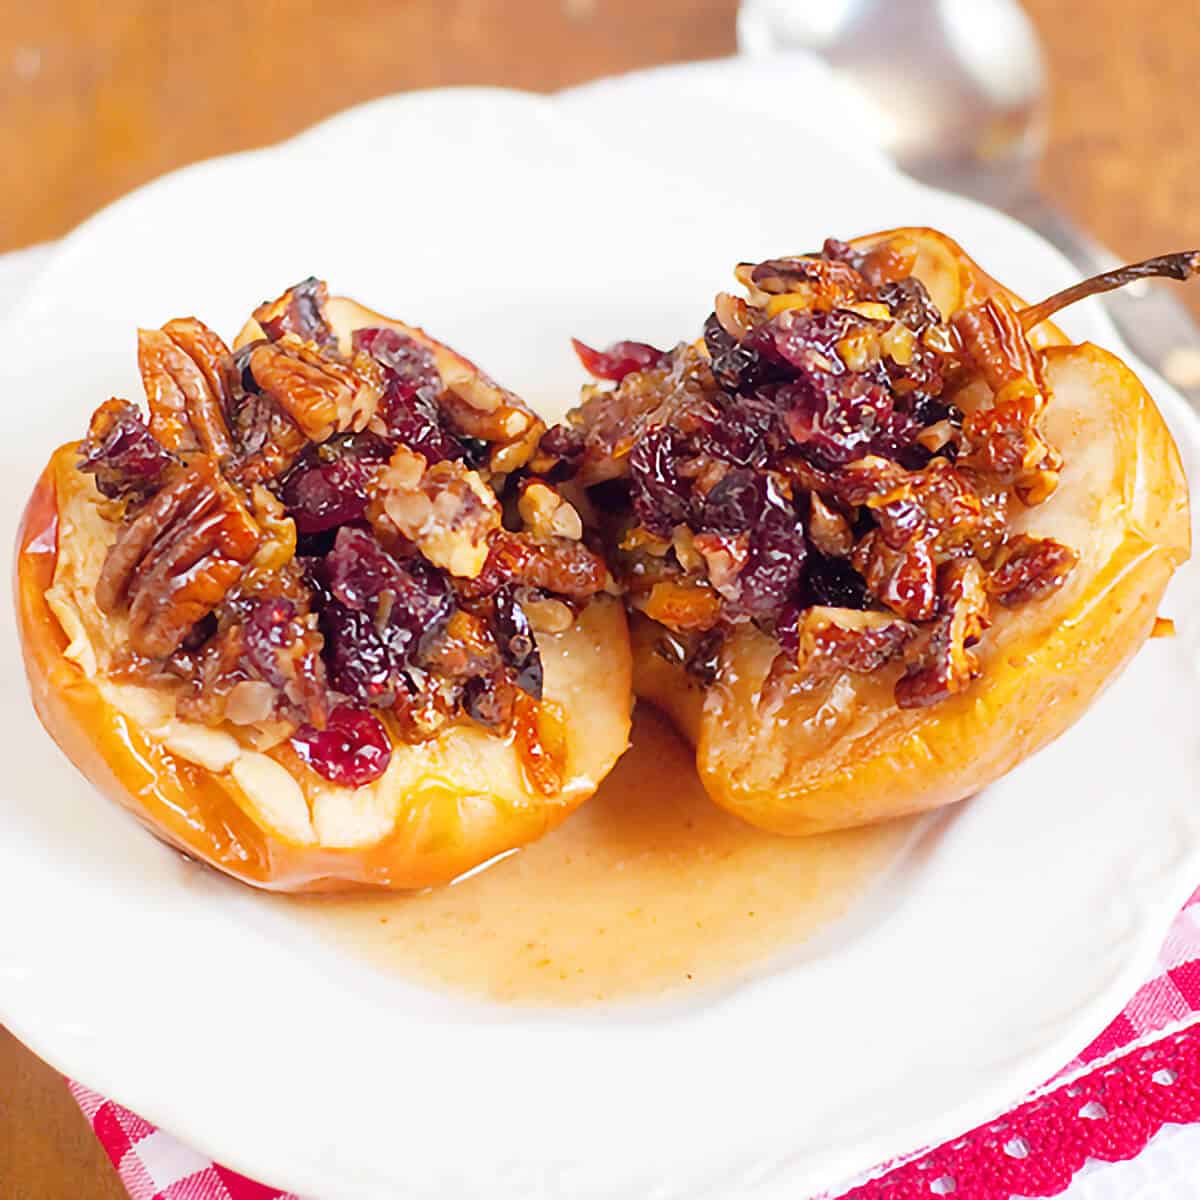 Baked Apples with Cranberries and Pecans